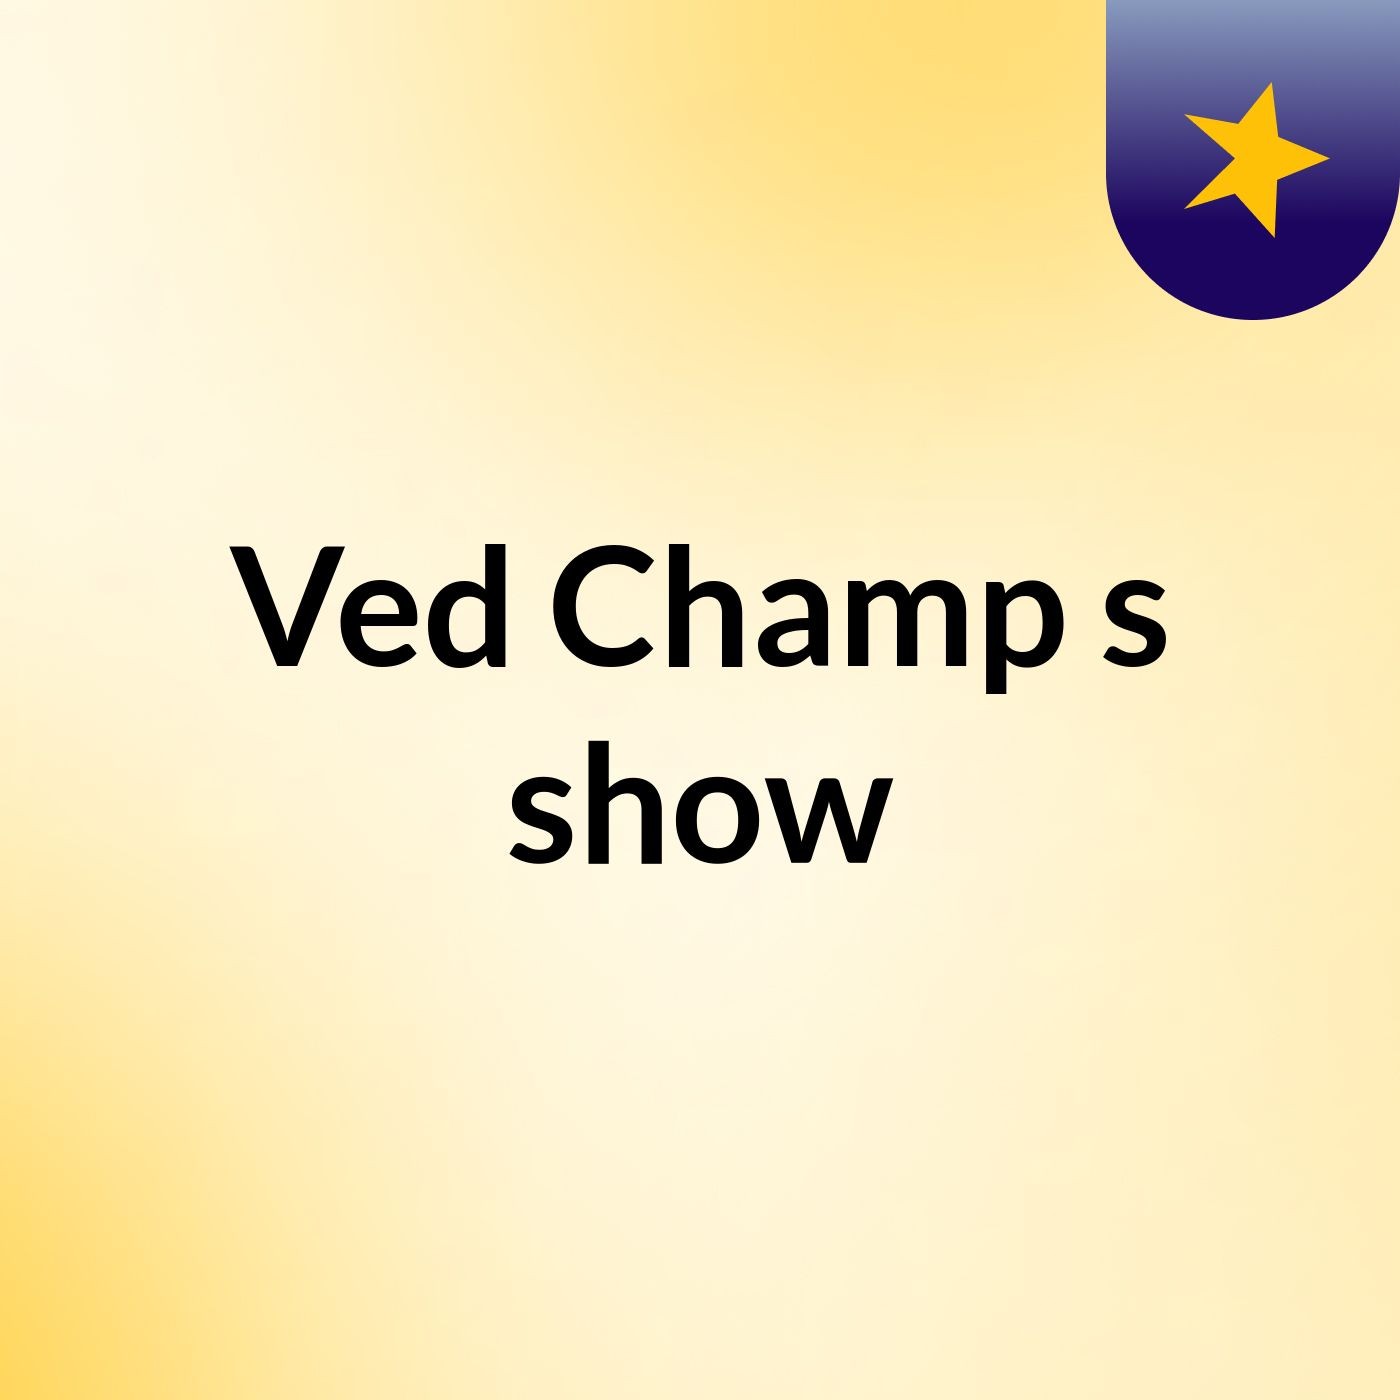 Ved Champ's show